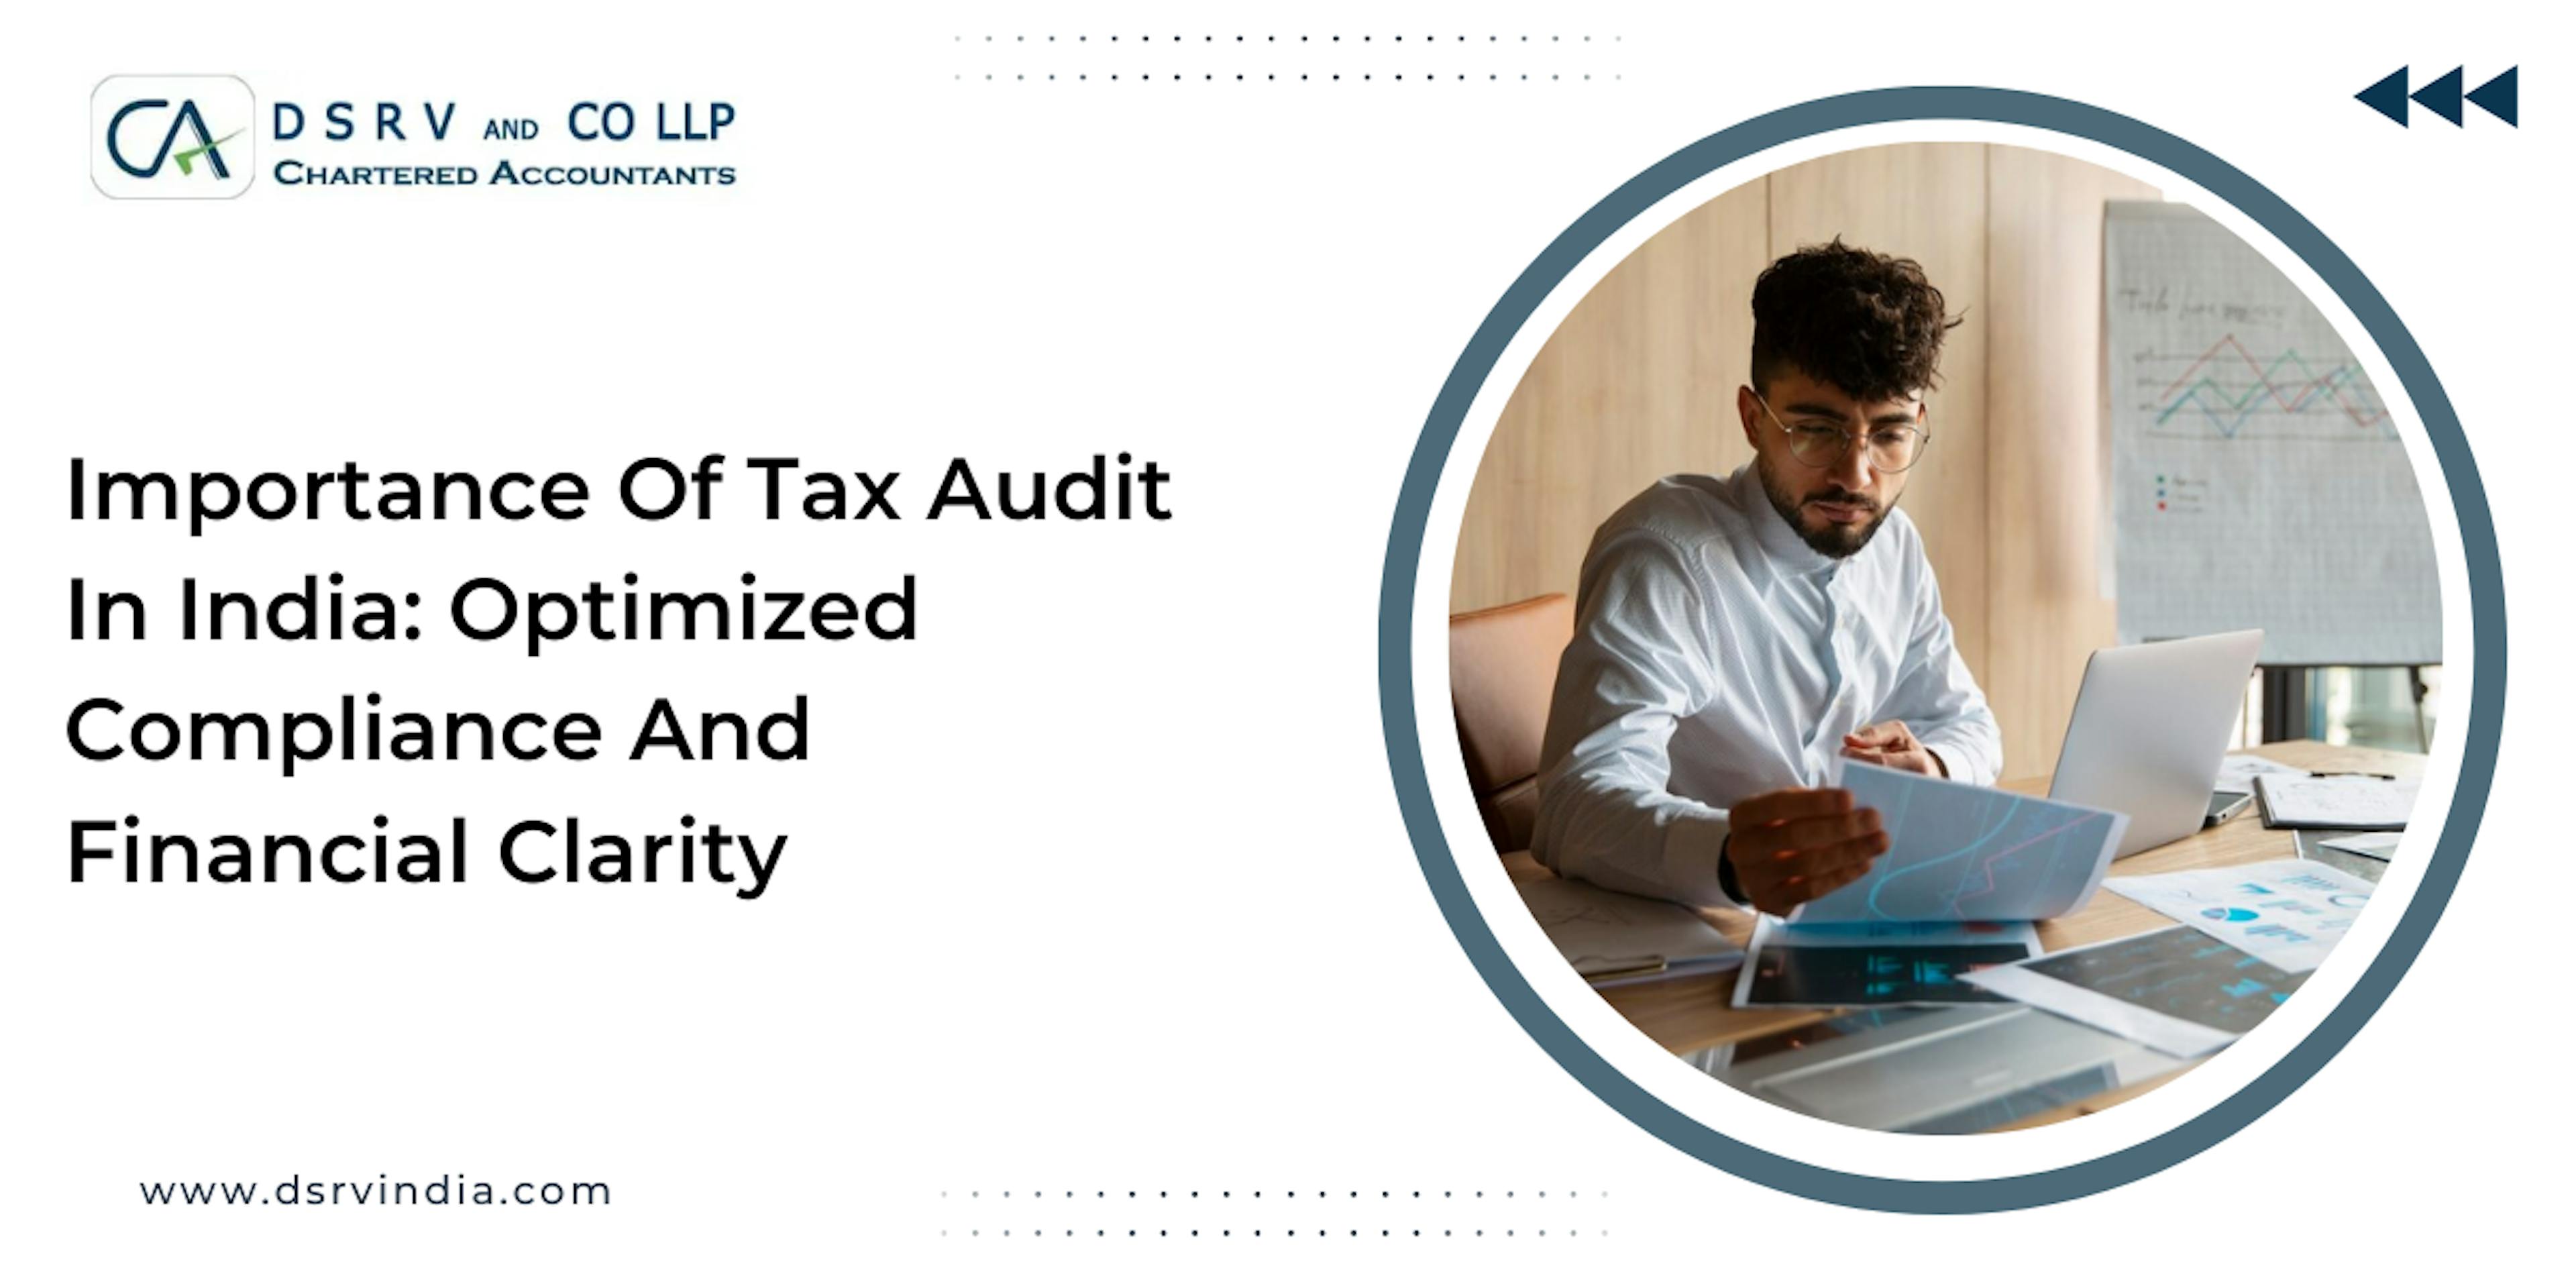 Importance Of Tax Audit In India: Optimized Compliance And Financial Clarity: Blog Poster